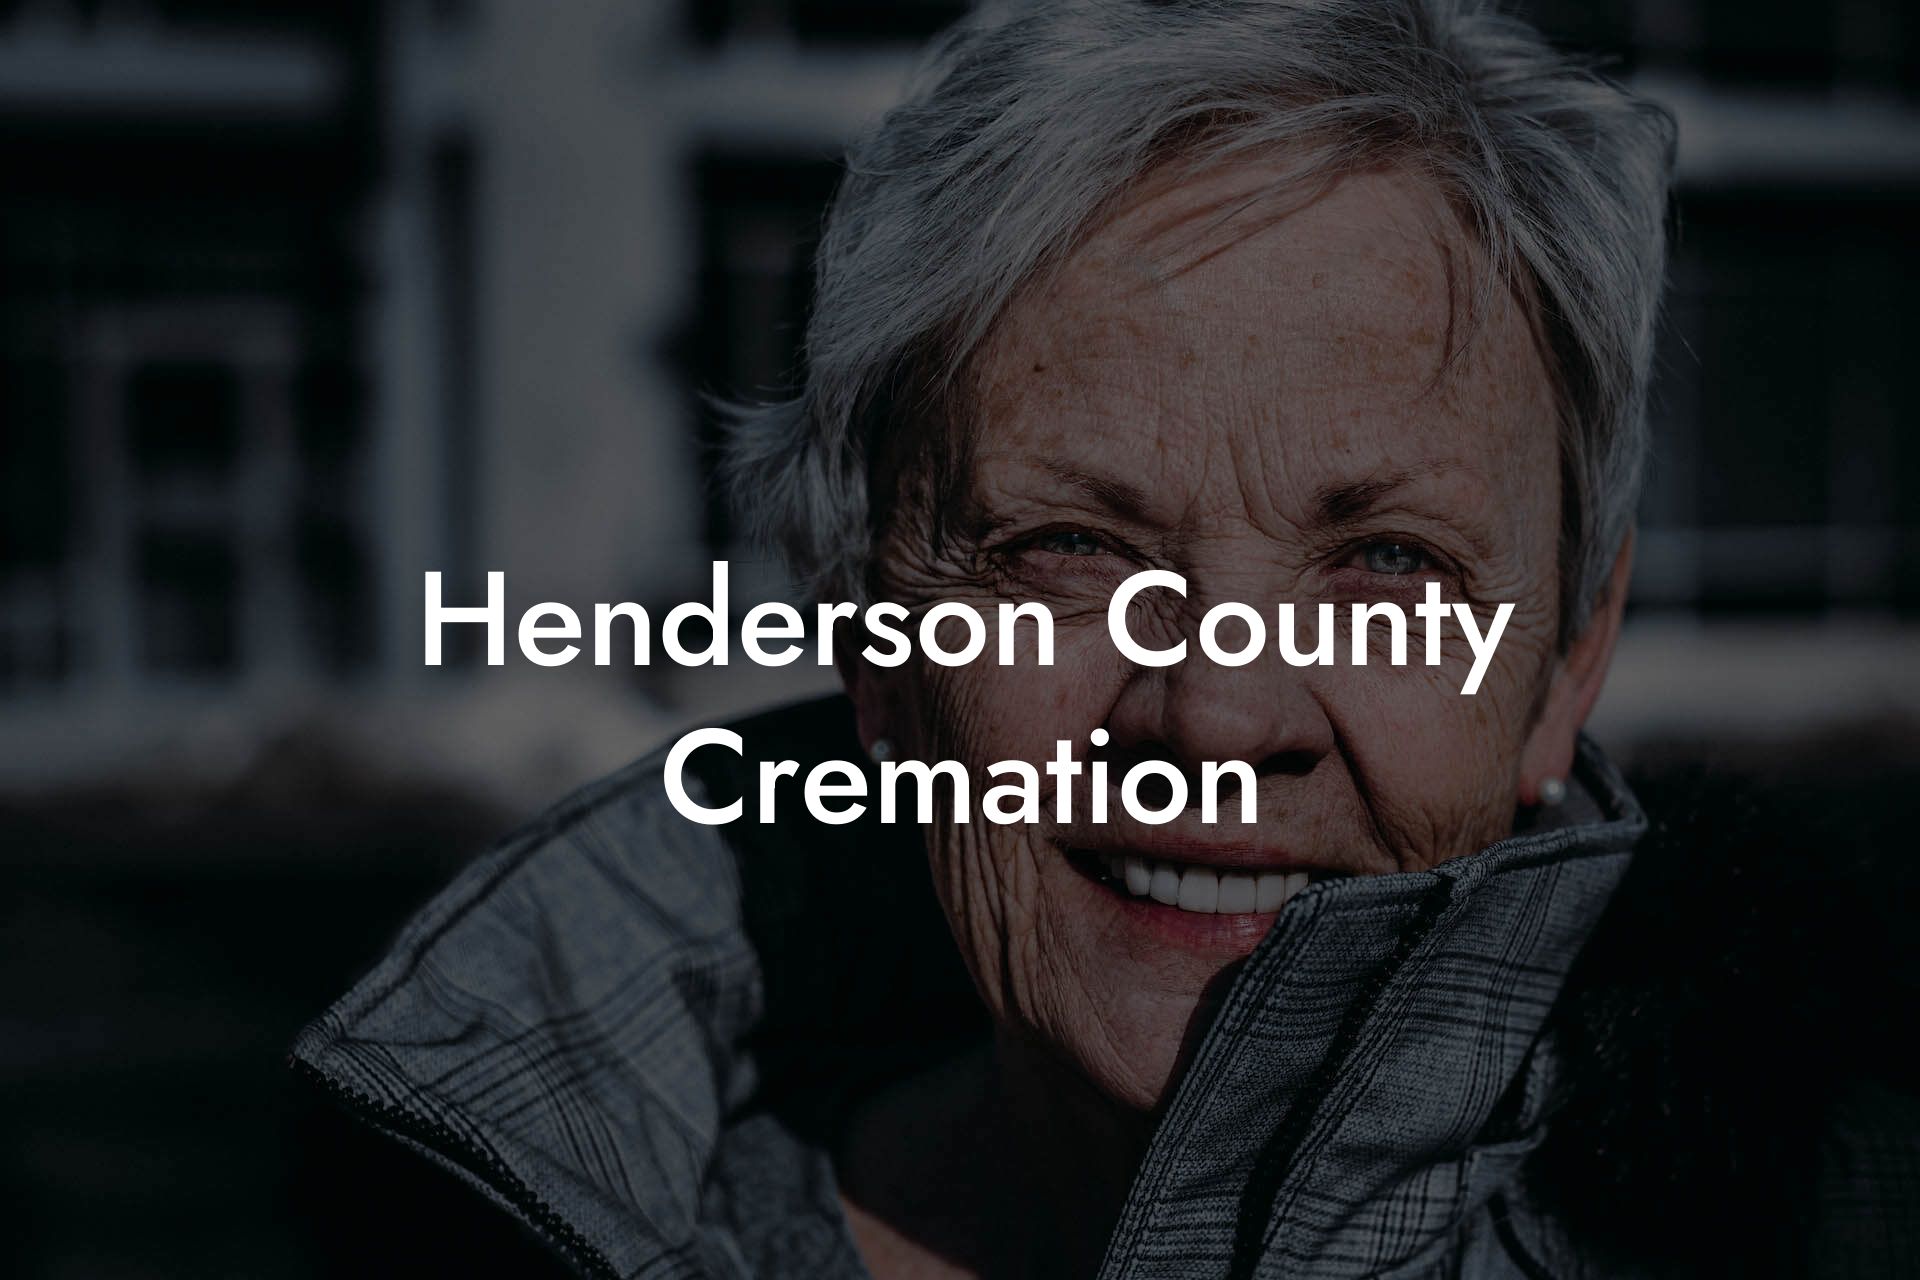 Henderson County Cremation